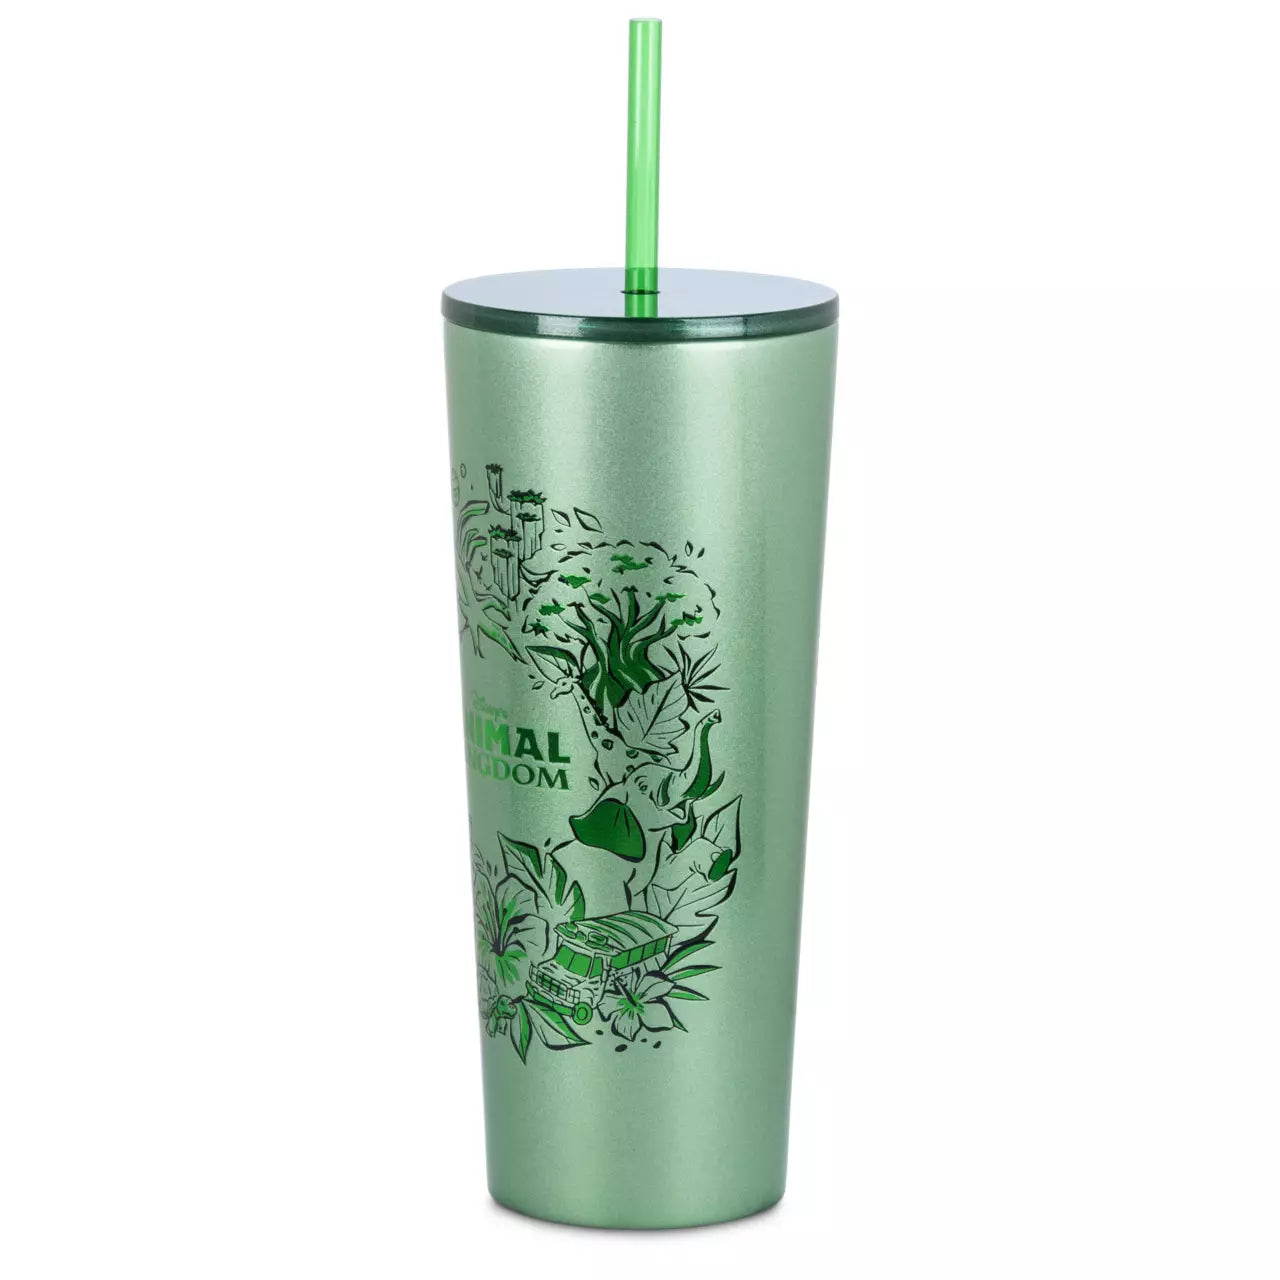 Star Wars Insulated Cup with Straw (24-Oz.)